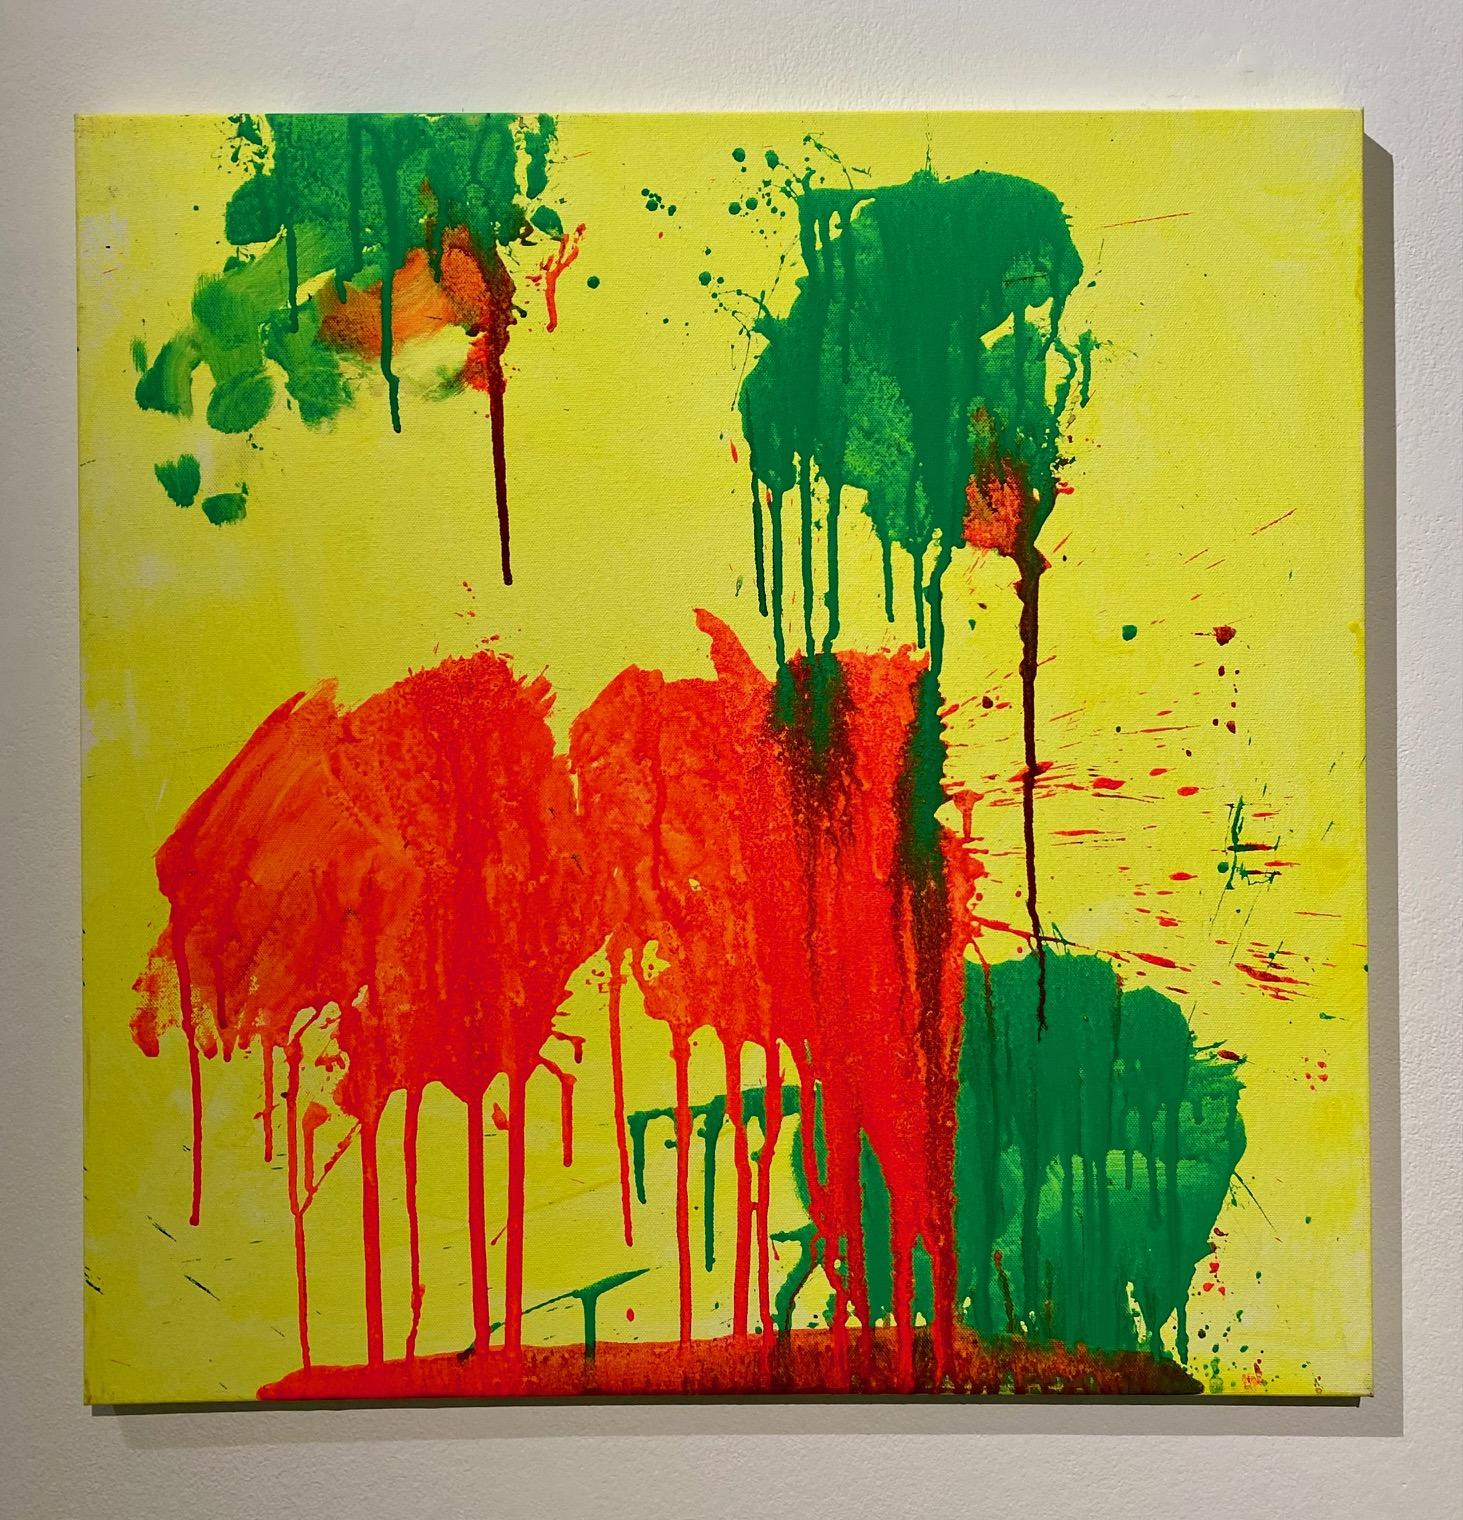 Ushio Shinohara Abstract Painting - "Red and Green on Yellow, " Acrylic Paint on Canvas - Abstract Boxing painting